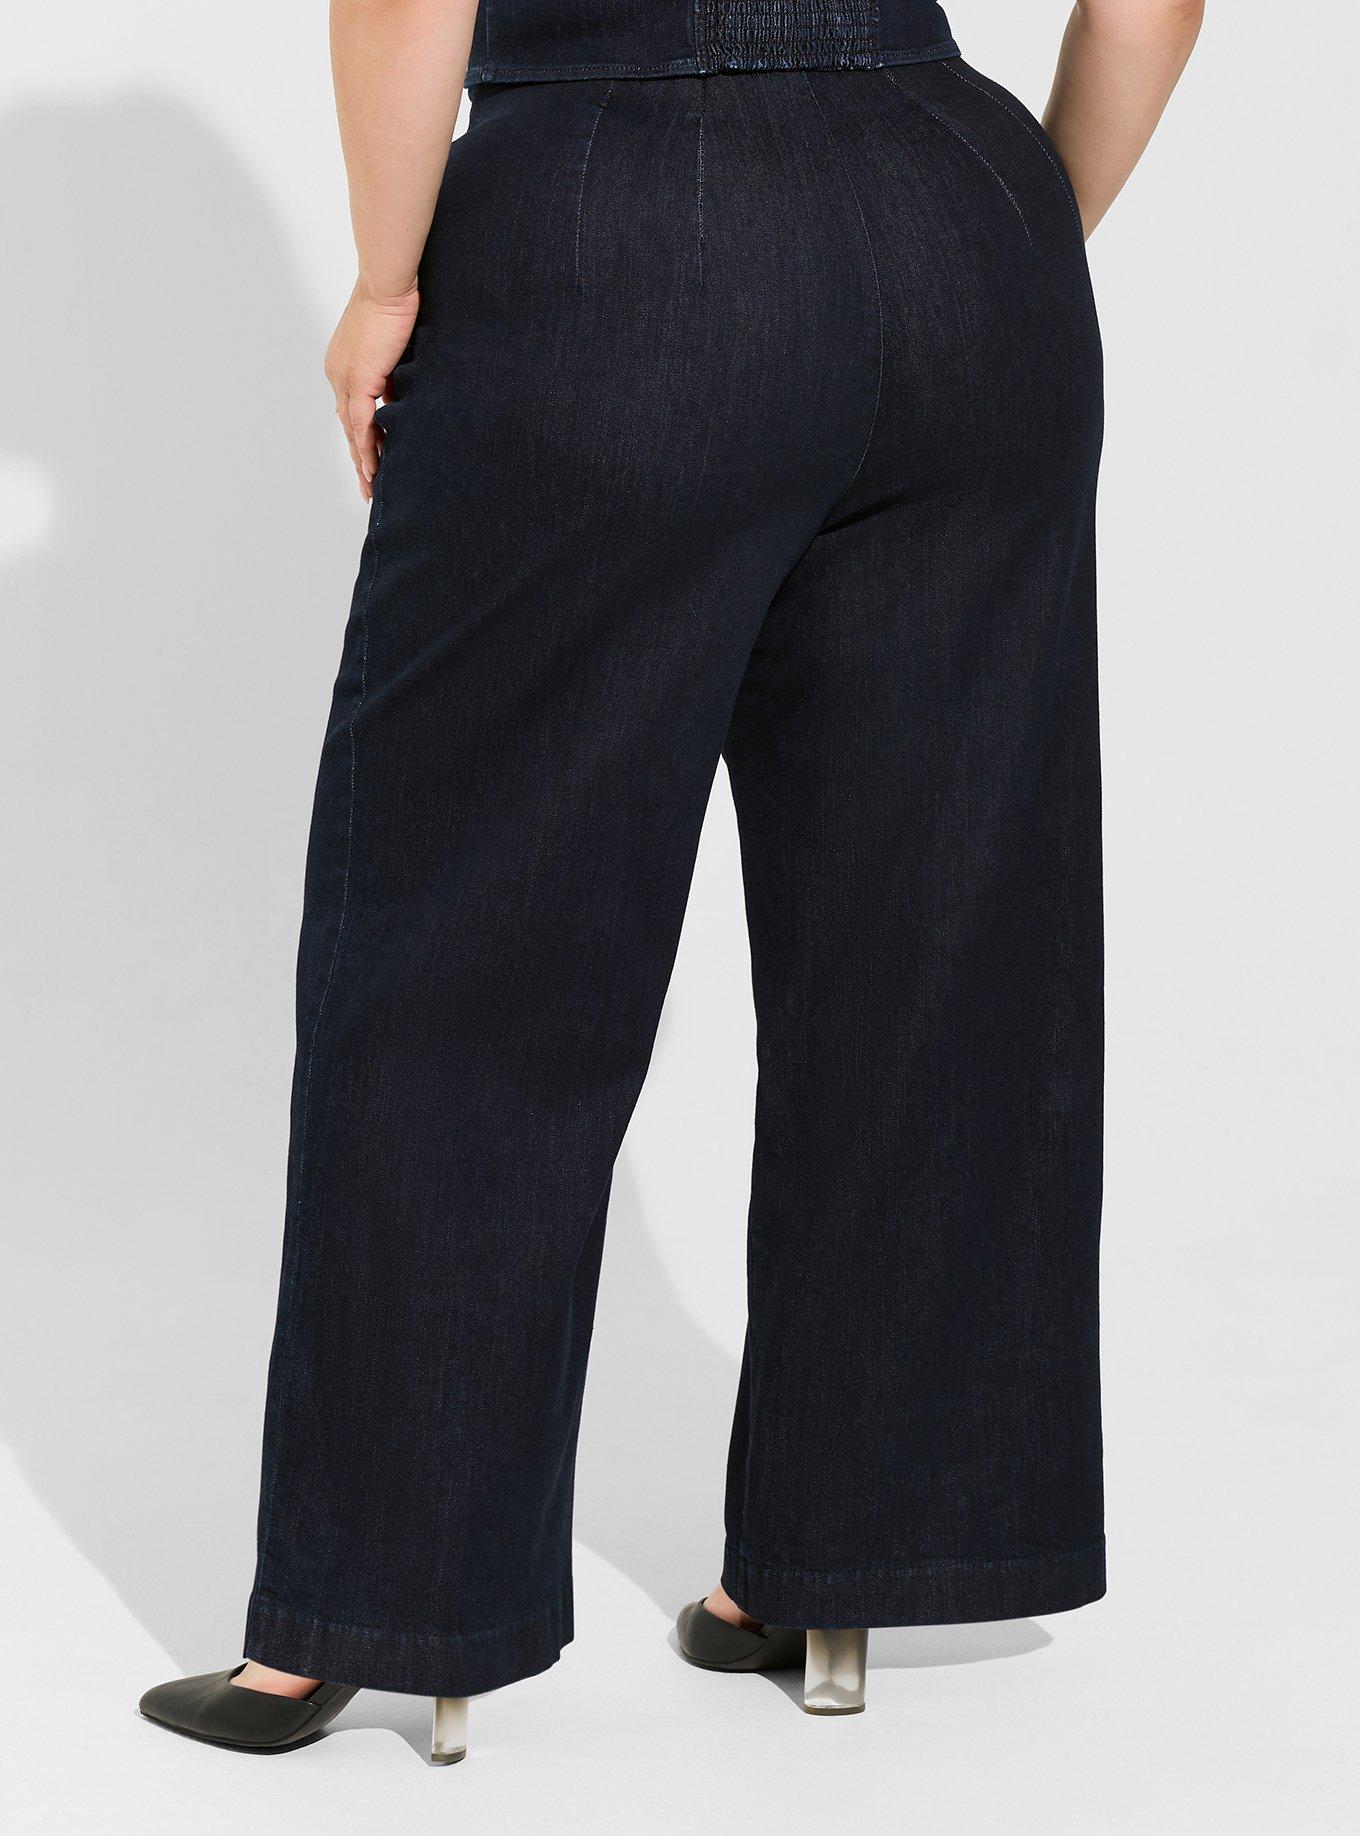 Palazzo Pants for Women - High Waisted Soft High Waisted Bootcut